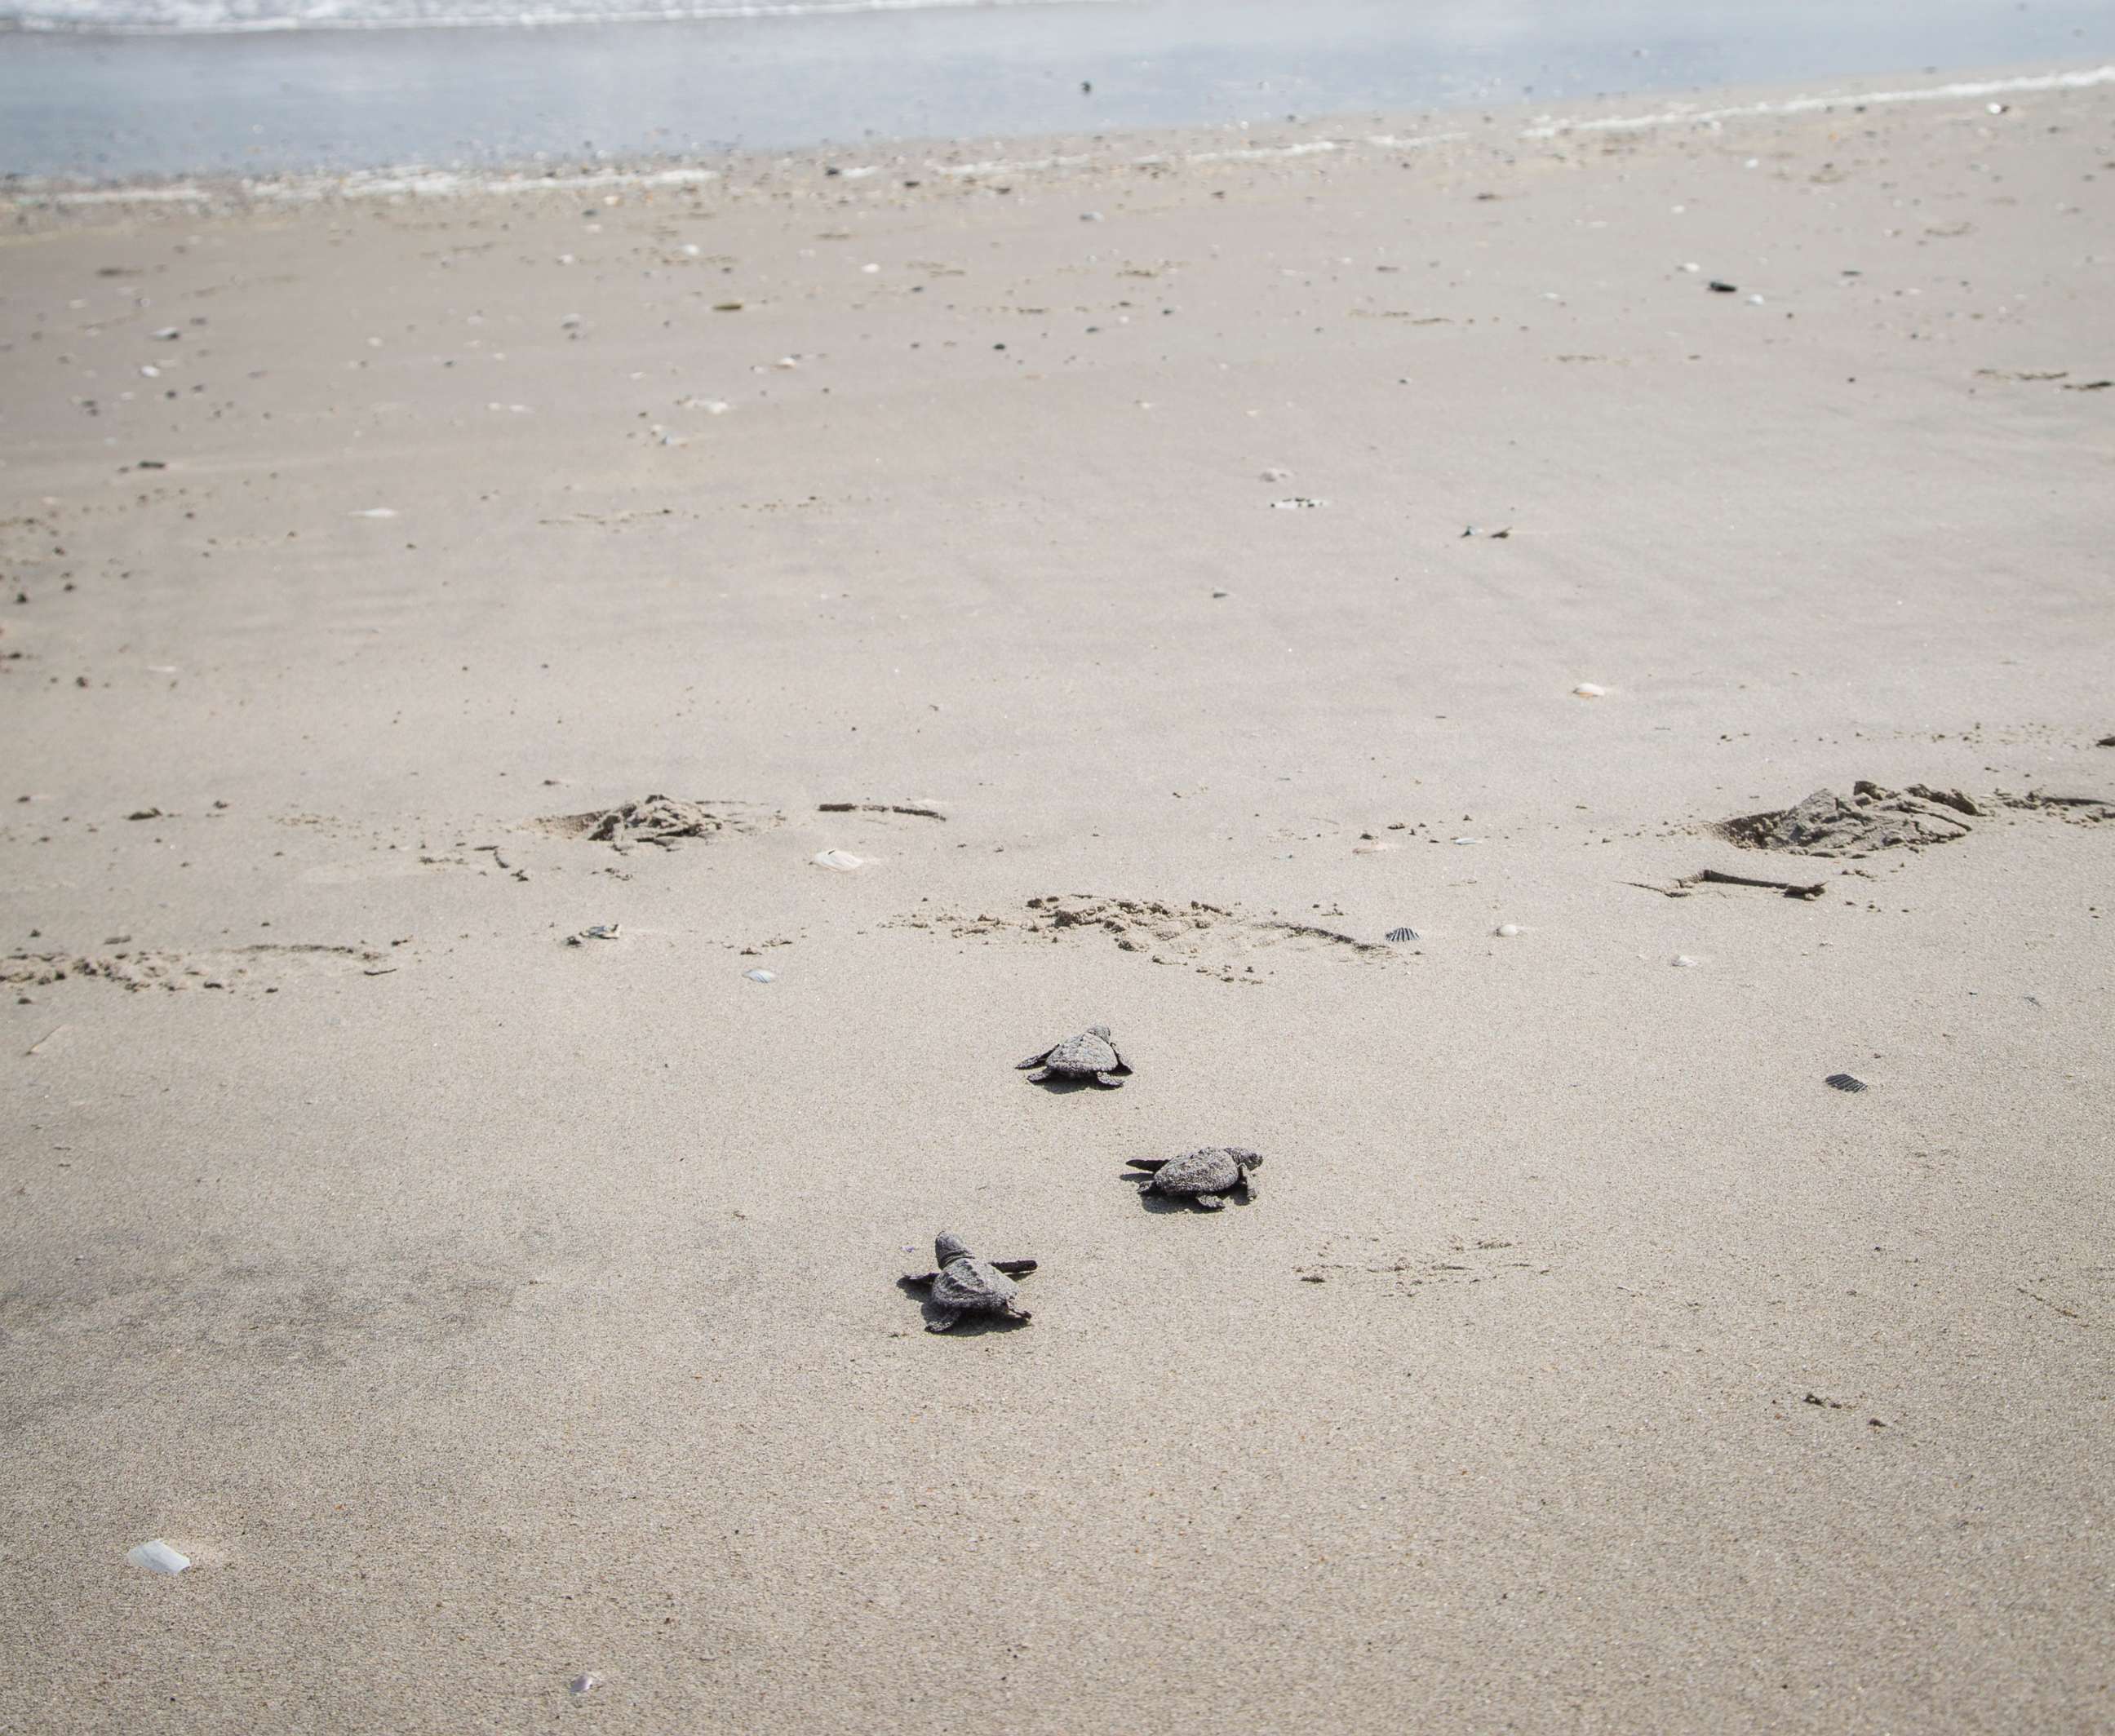 PHOTO: Ninety-six of the world's most endangered sea turtles hatched and crawled onto a beach on New York's Rockaway Peninsula in September, 2018.